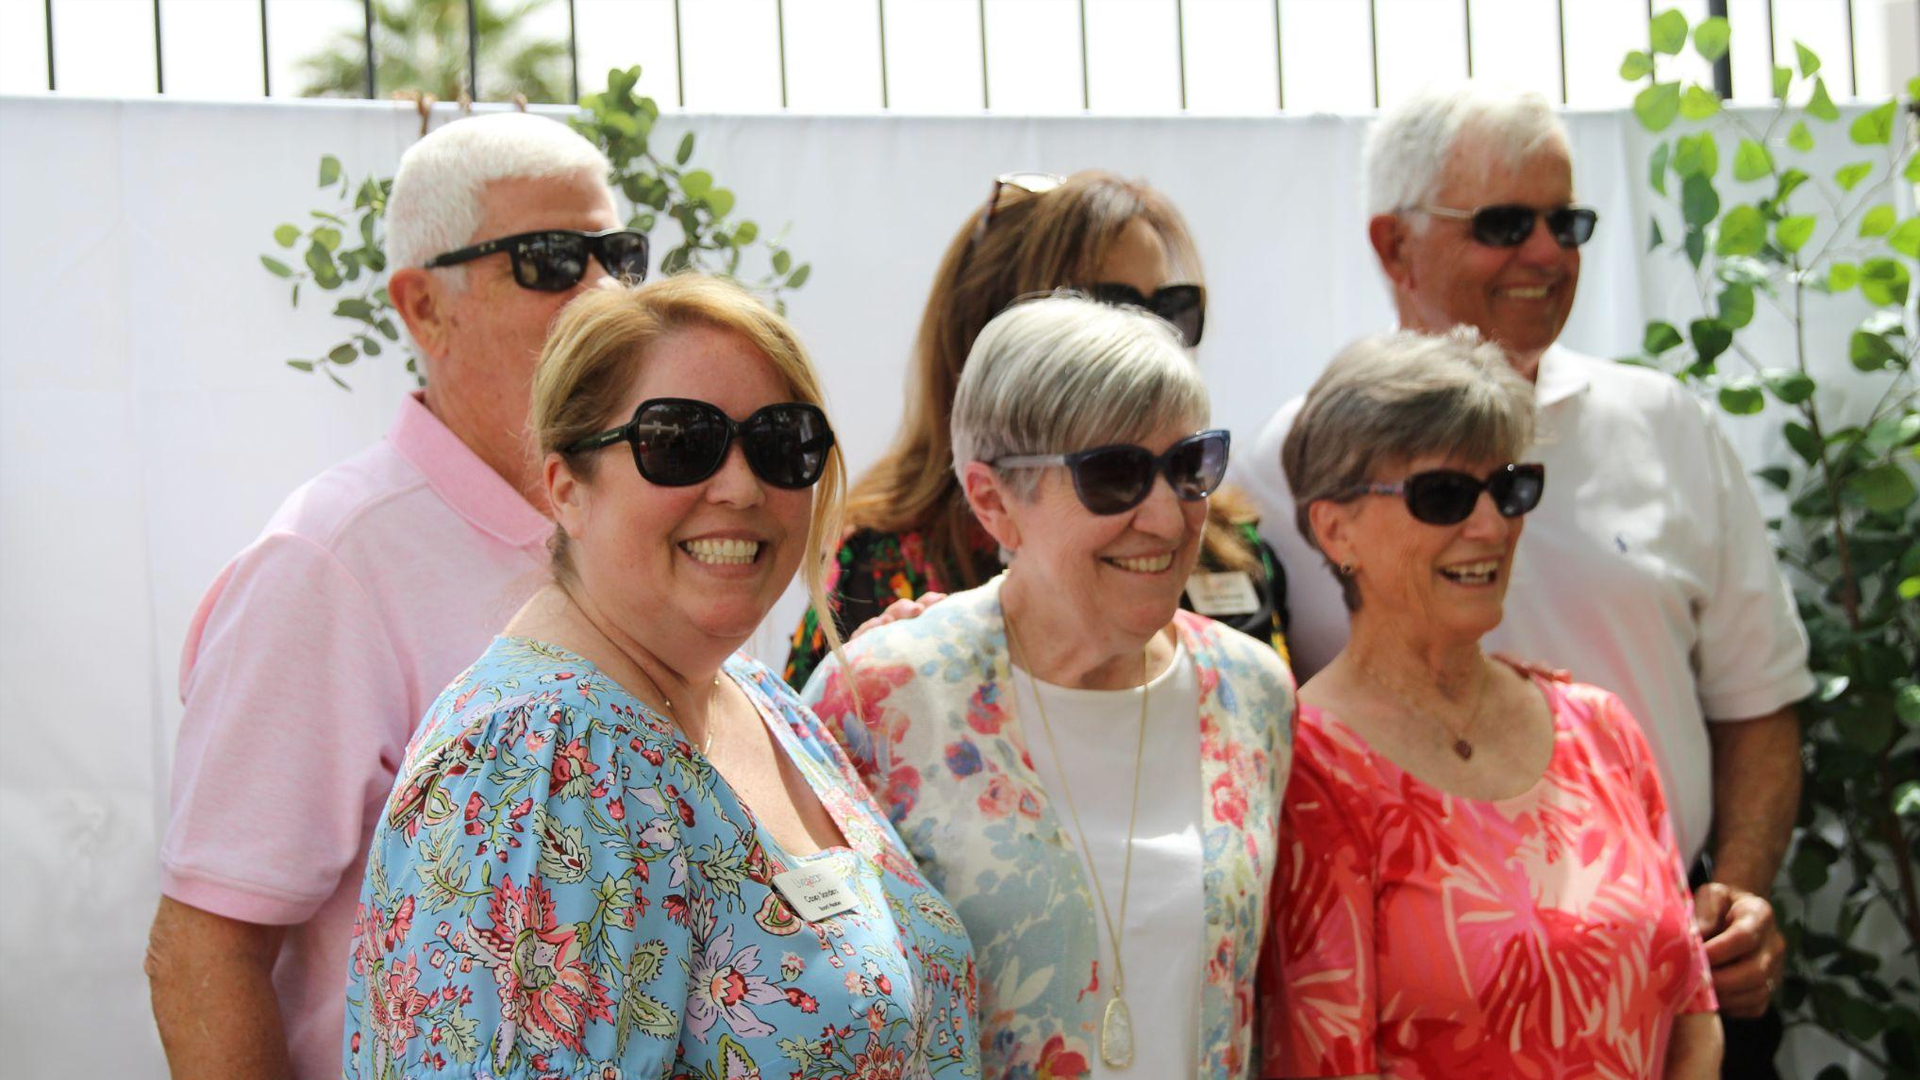 The Hope Blooms Brunch raised $8,500 to support Live & Learn’s mission to empower Maricopa County women to break the cycle of generational poverty.